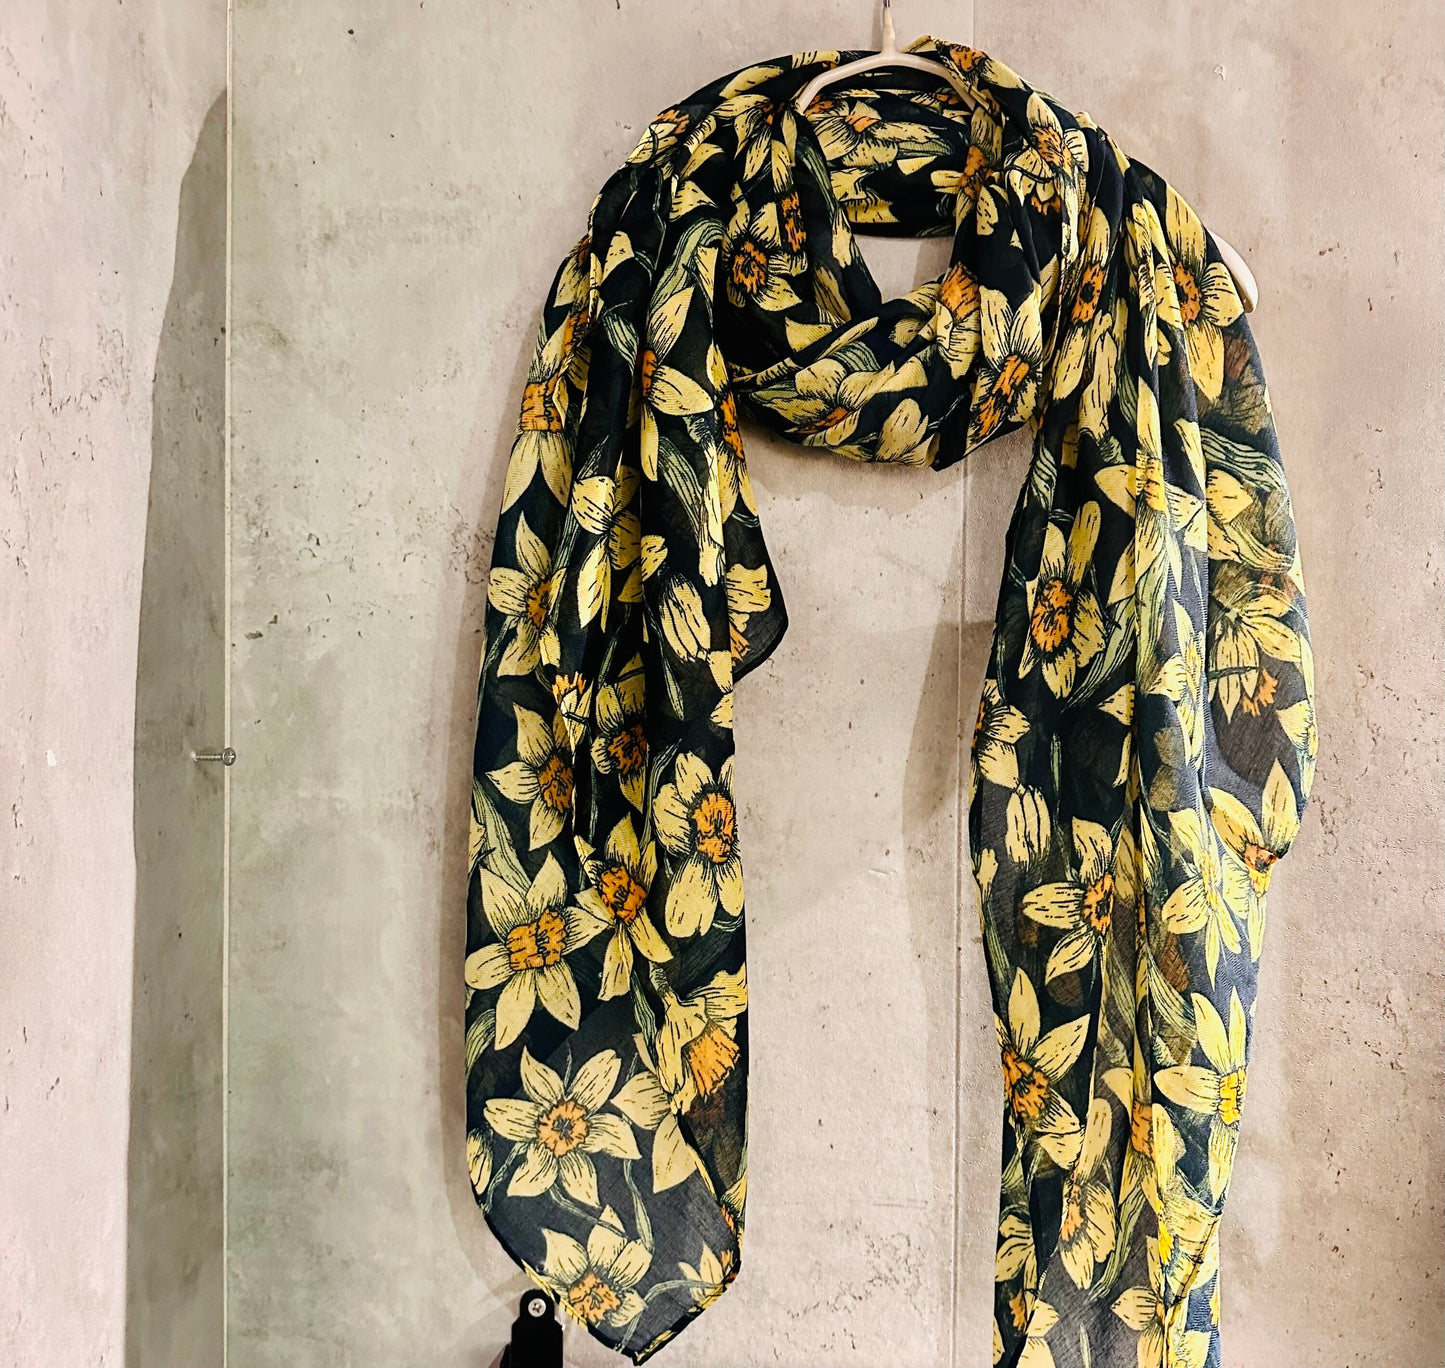 Dark Blue Organic Cotton Scarf with Eco-Friendly Seamless Daffodil Flowers – A Thoughtful Gift for Mom, Ideal for Birthday and Christmas Celebrations